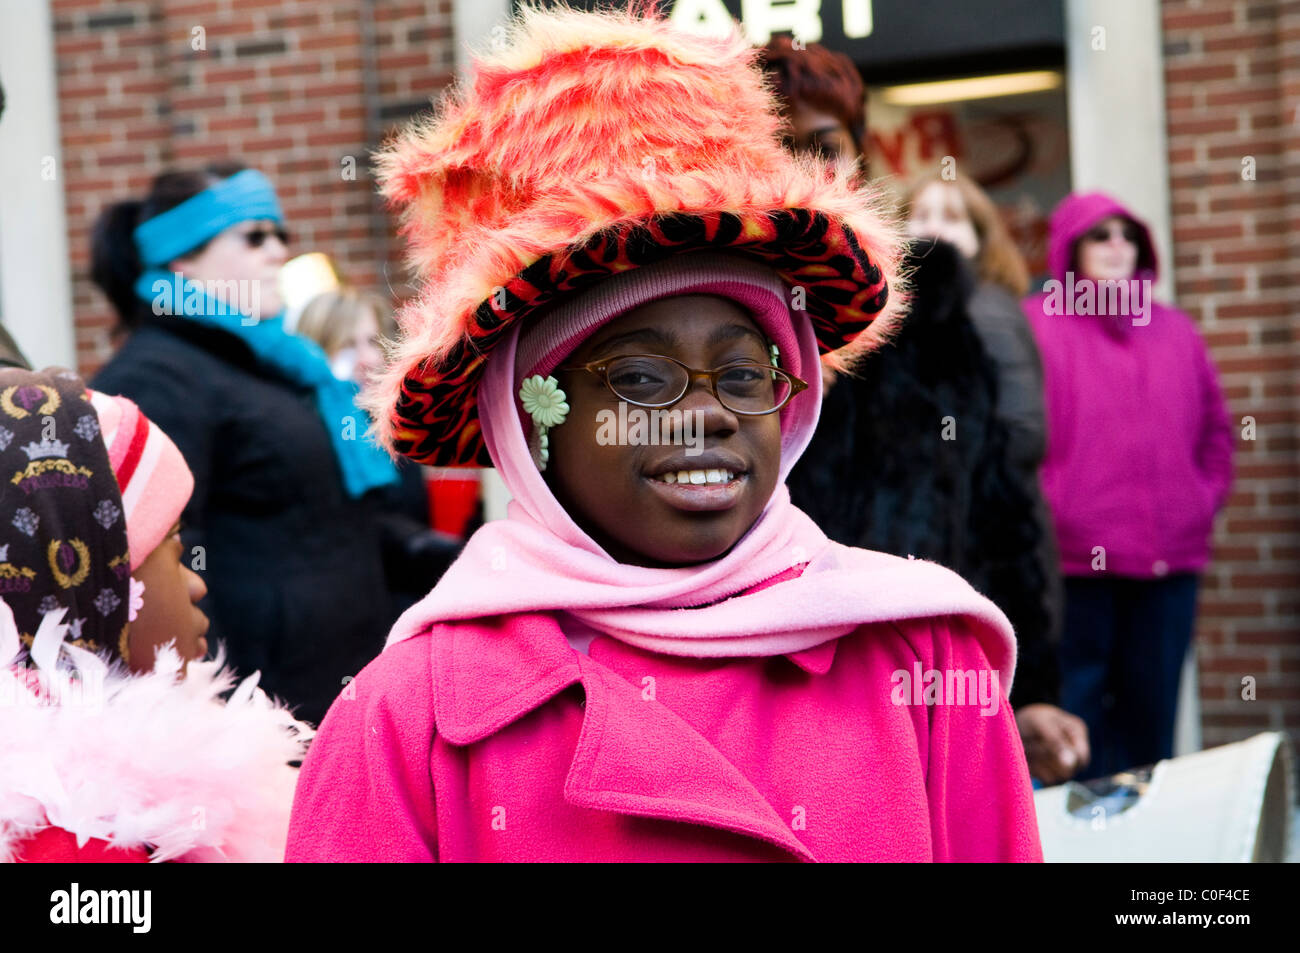 Smiling at the colorful Mummers parade in Philadelphia. Stock Photo